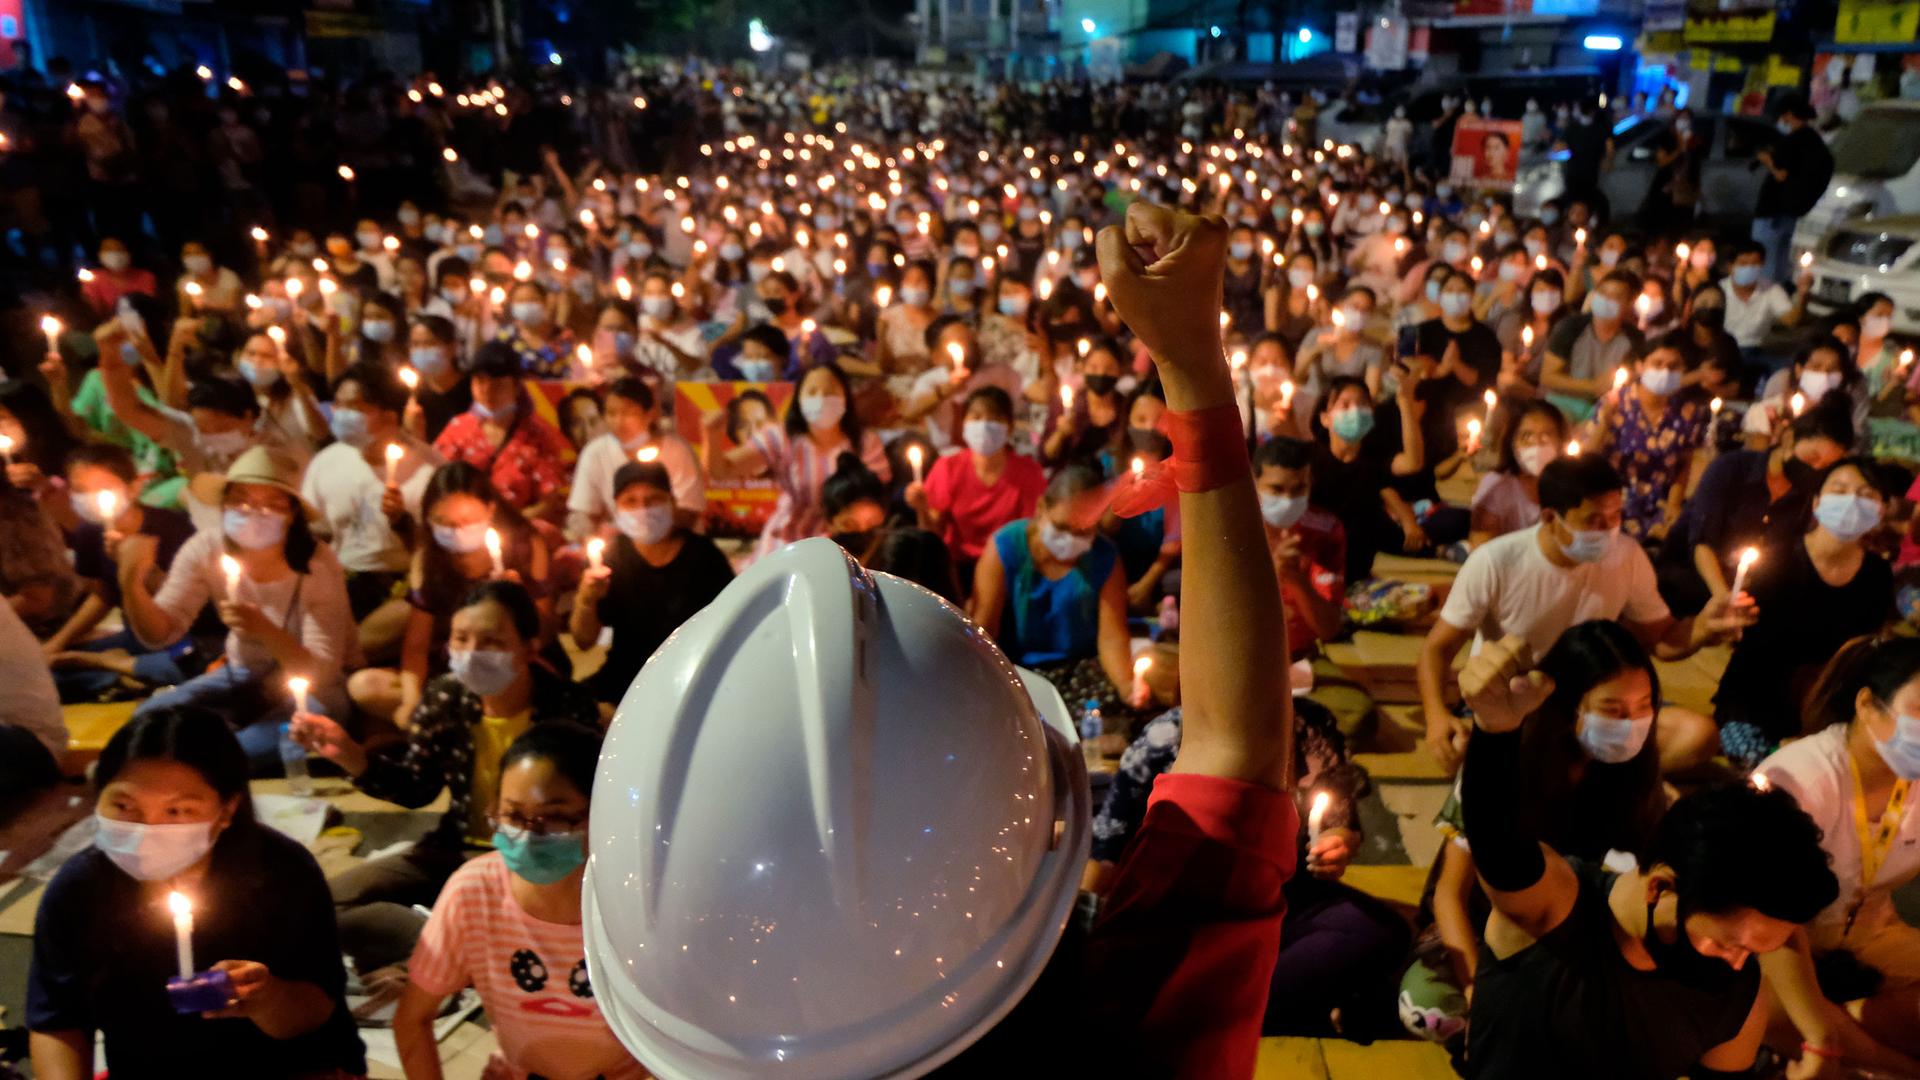 A person is shown in the near ground with their fist in the air and wearing a white construction helmet with a large crowd of people sitting and holding candles.